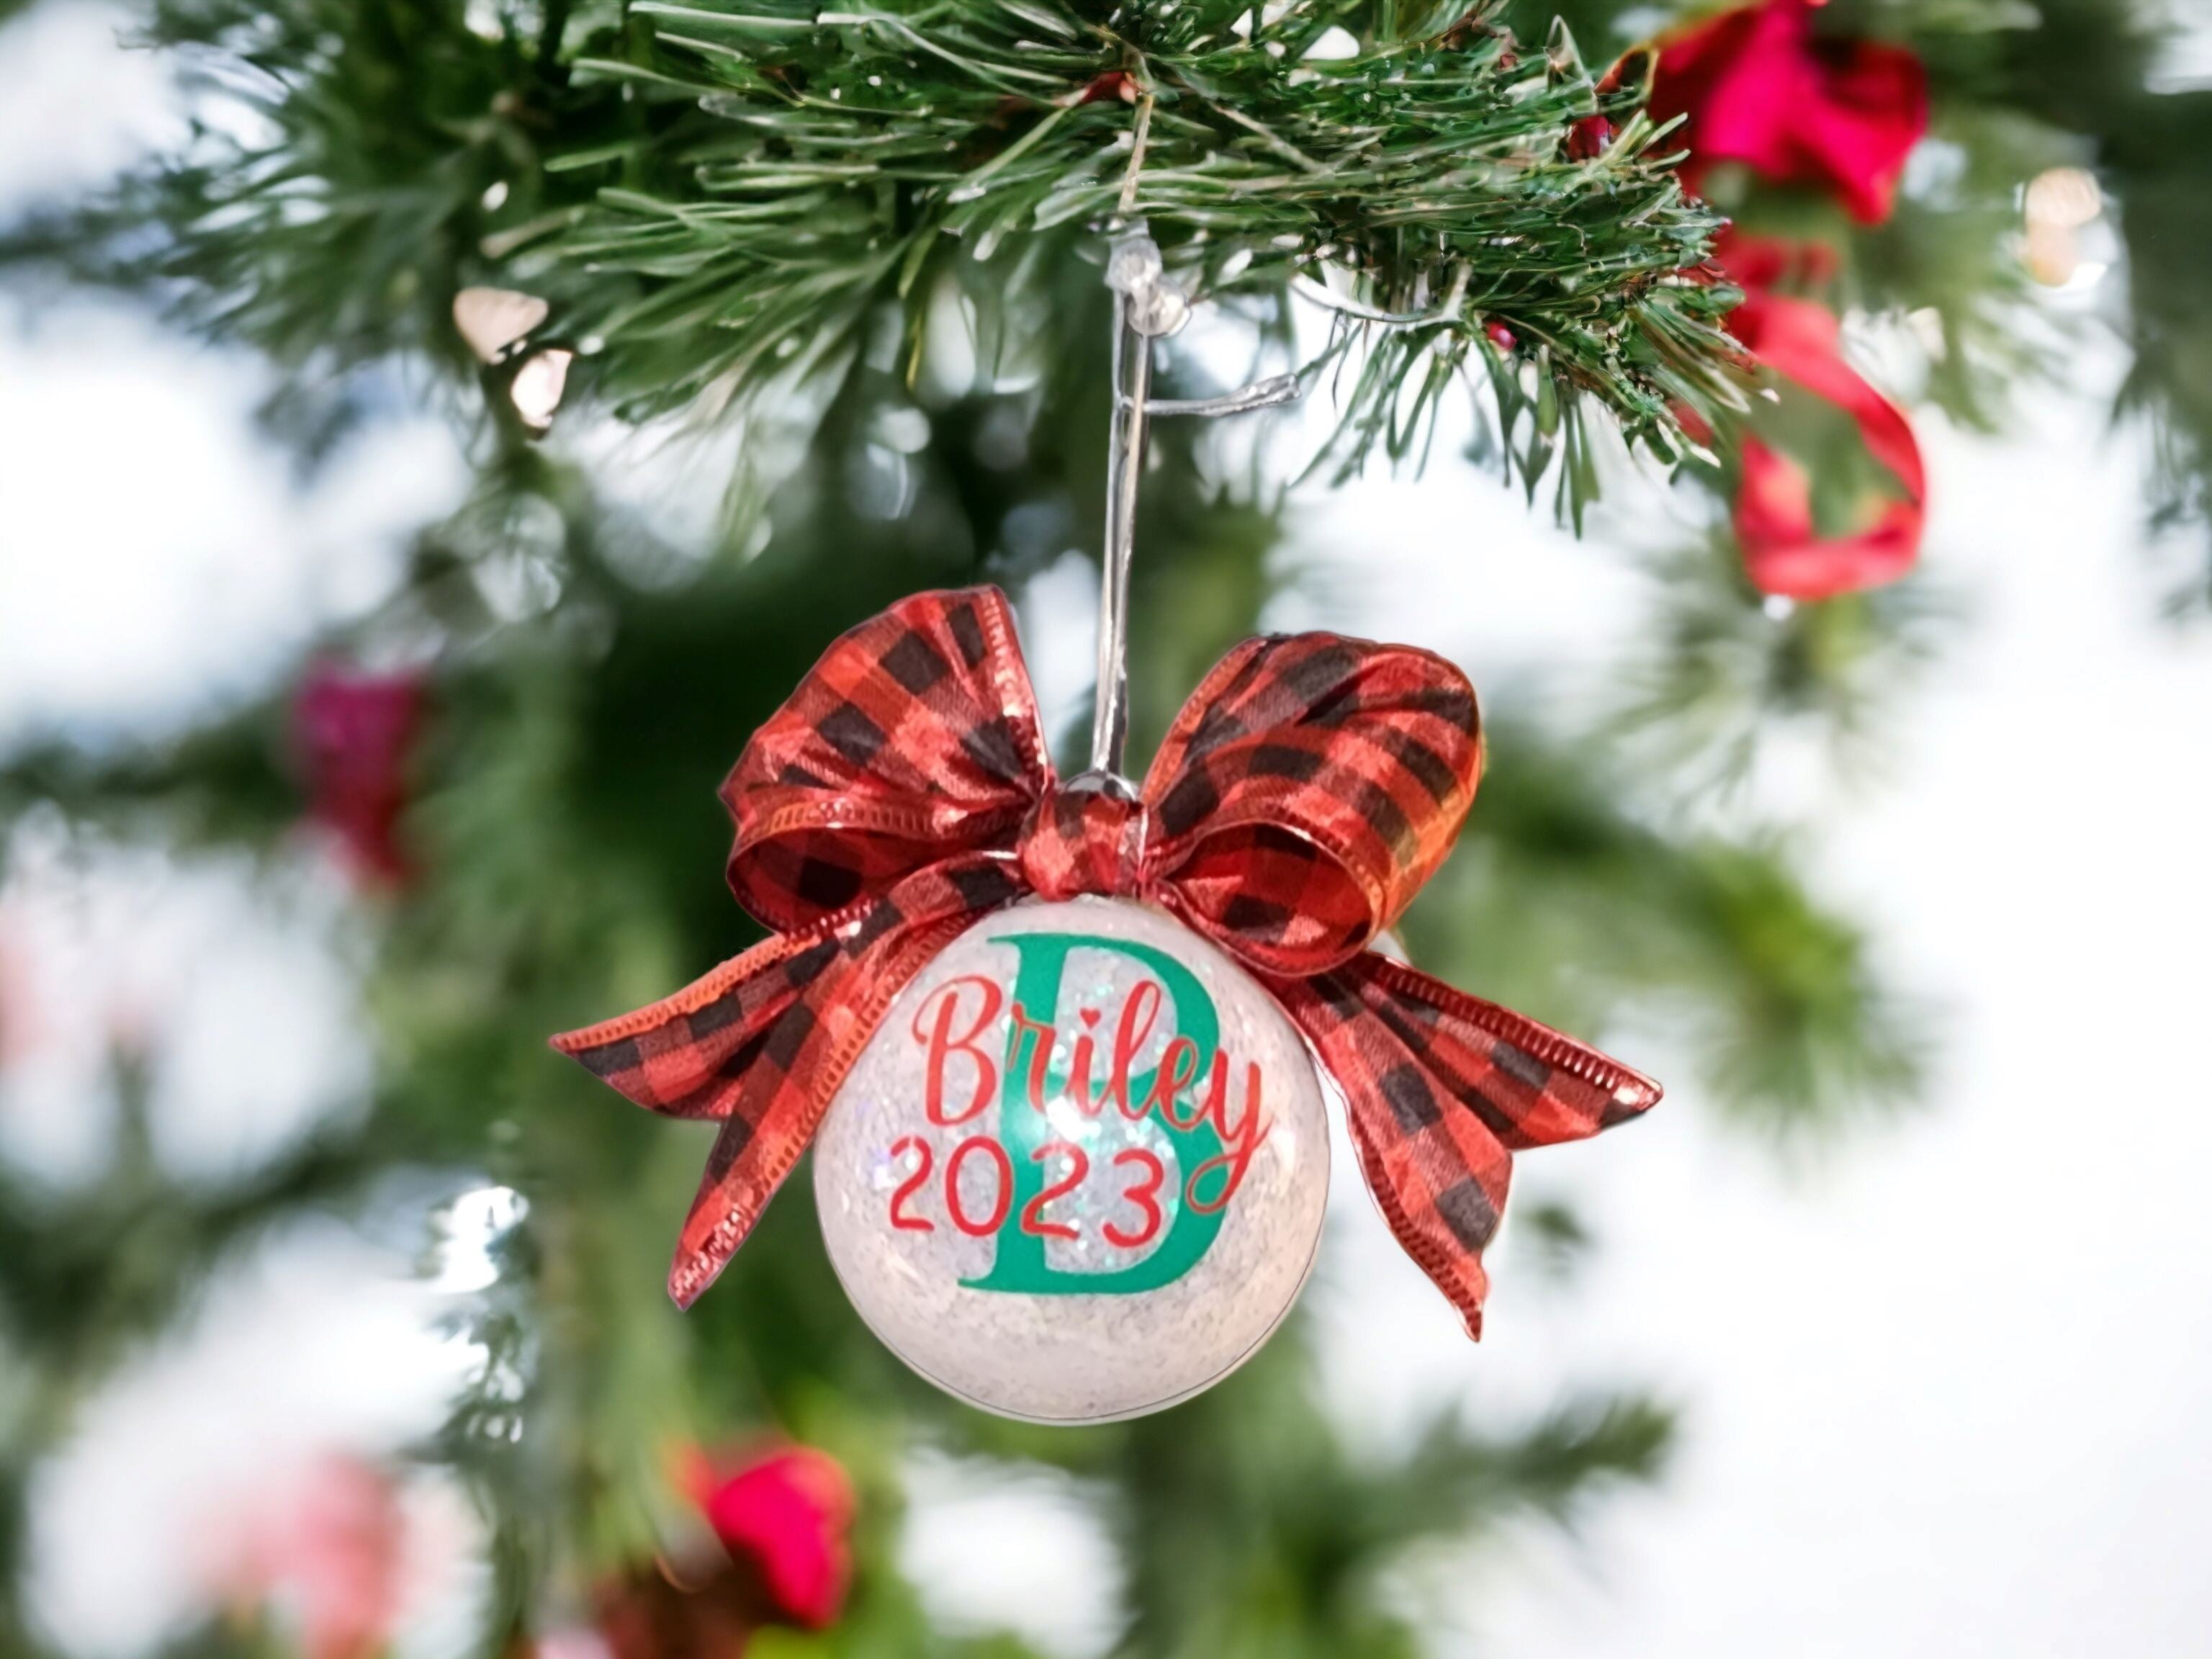 Personalized ornaments Gravesfamilycreations